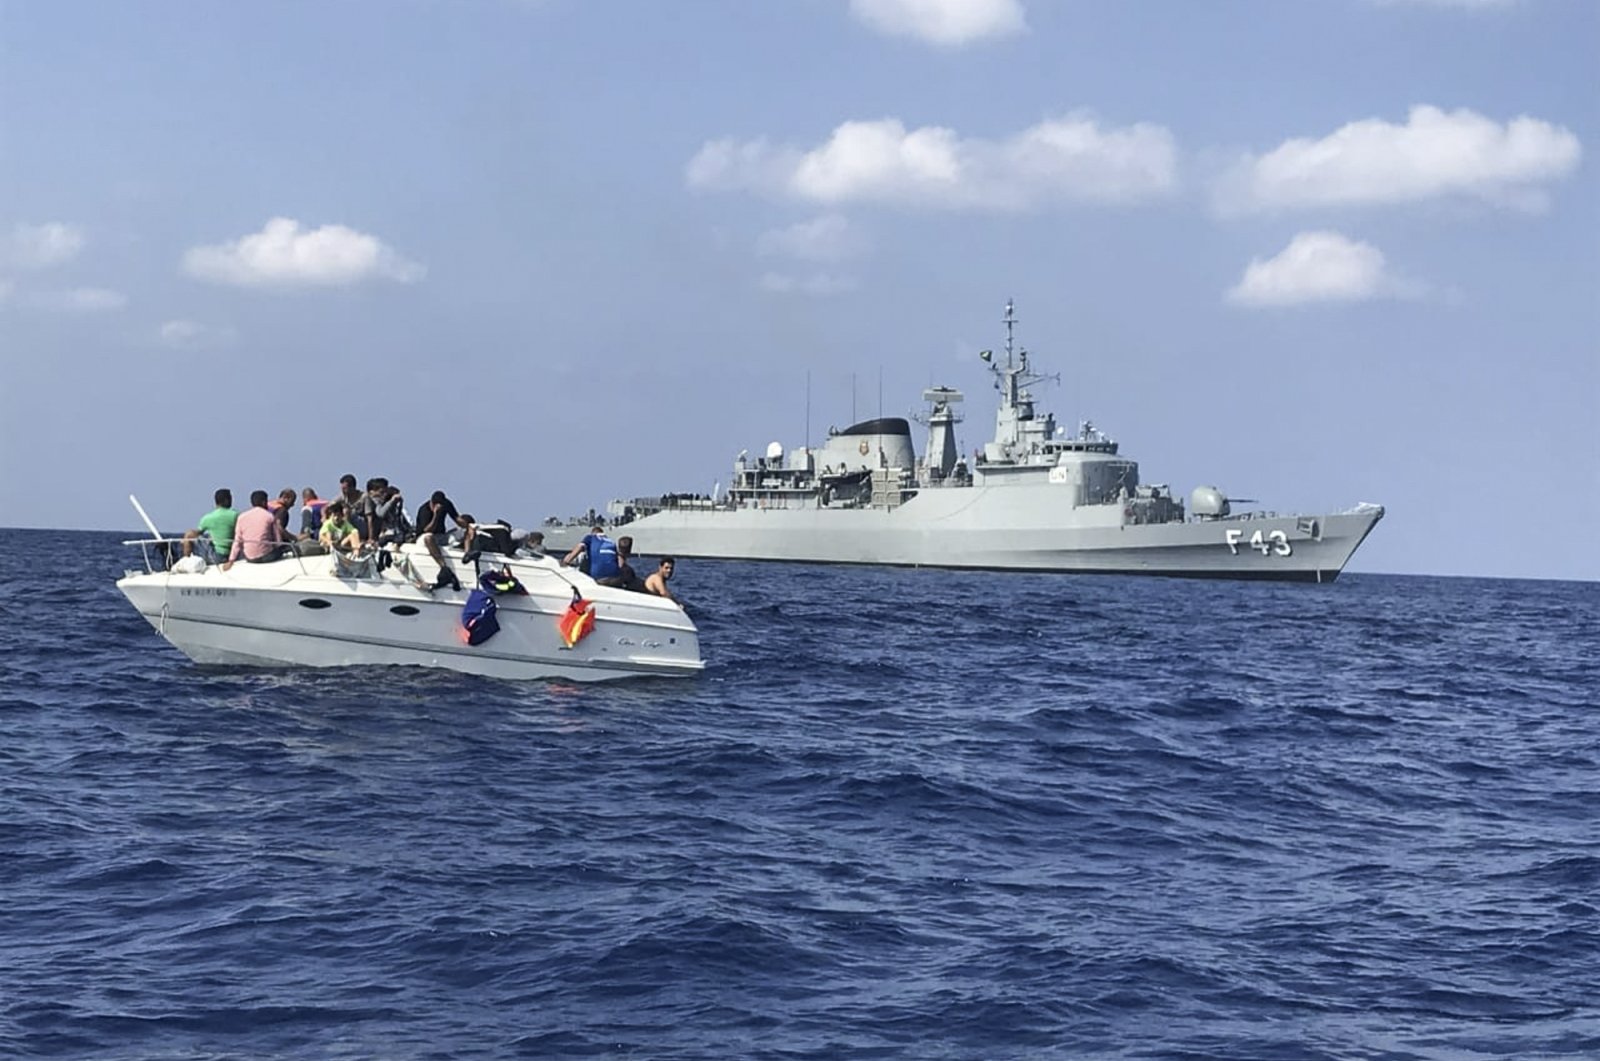 In this photo by United Nations Interim Force in Lebanon (UNIFIL), UNIFIL&#039;s flagship, BRS Liberal, approaches a boat overcrowded with migrants in the Mediterranean Sea on Oct. 12, 2018. (UNIFIL via AP, File)